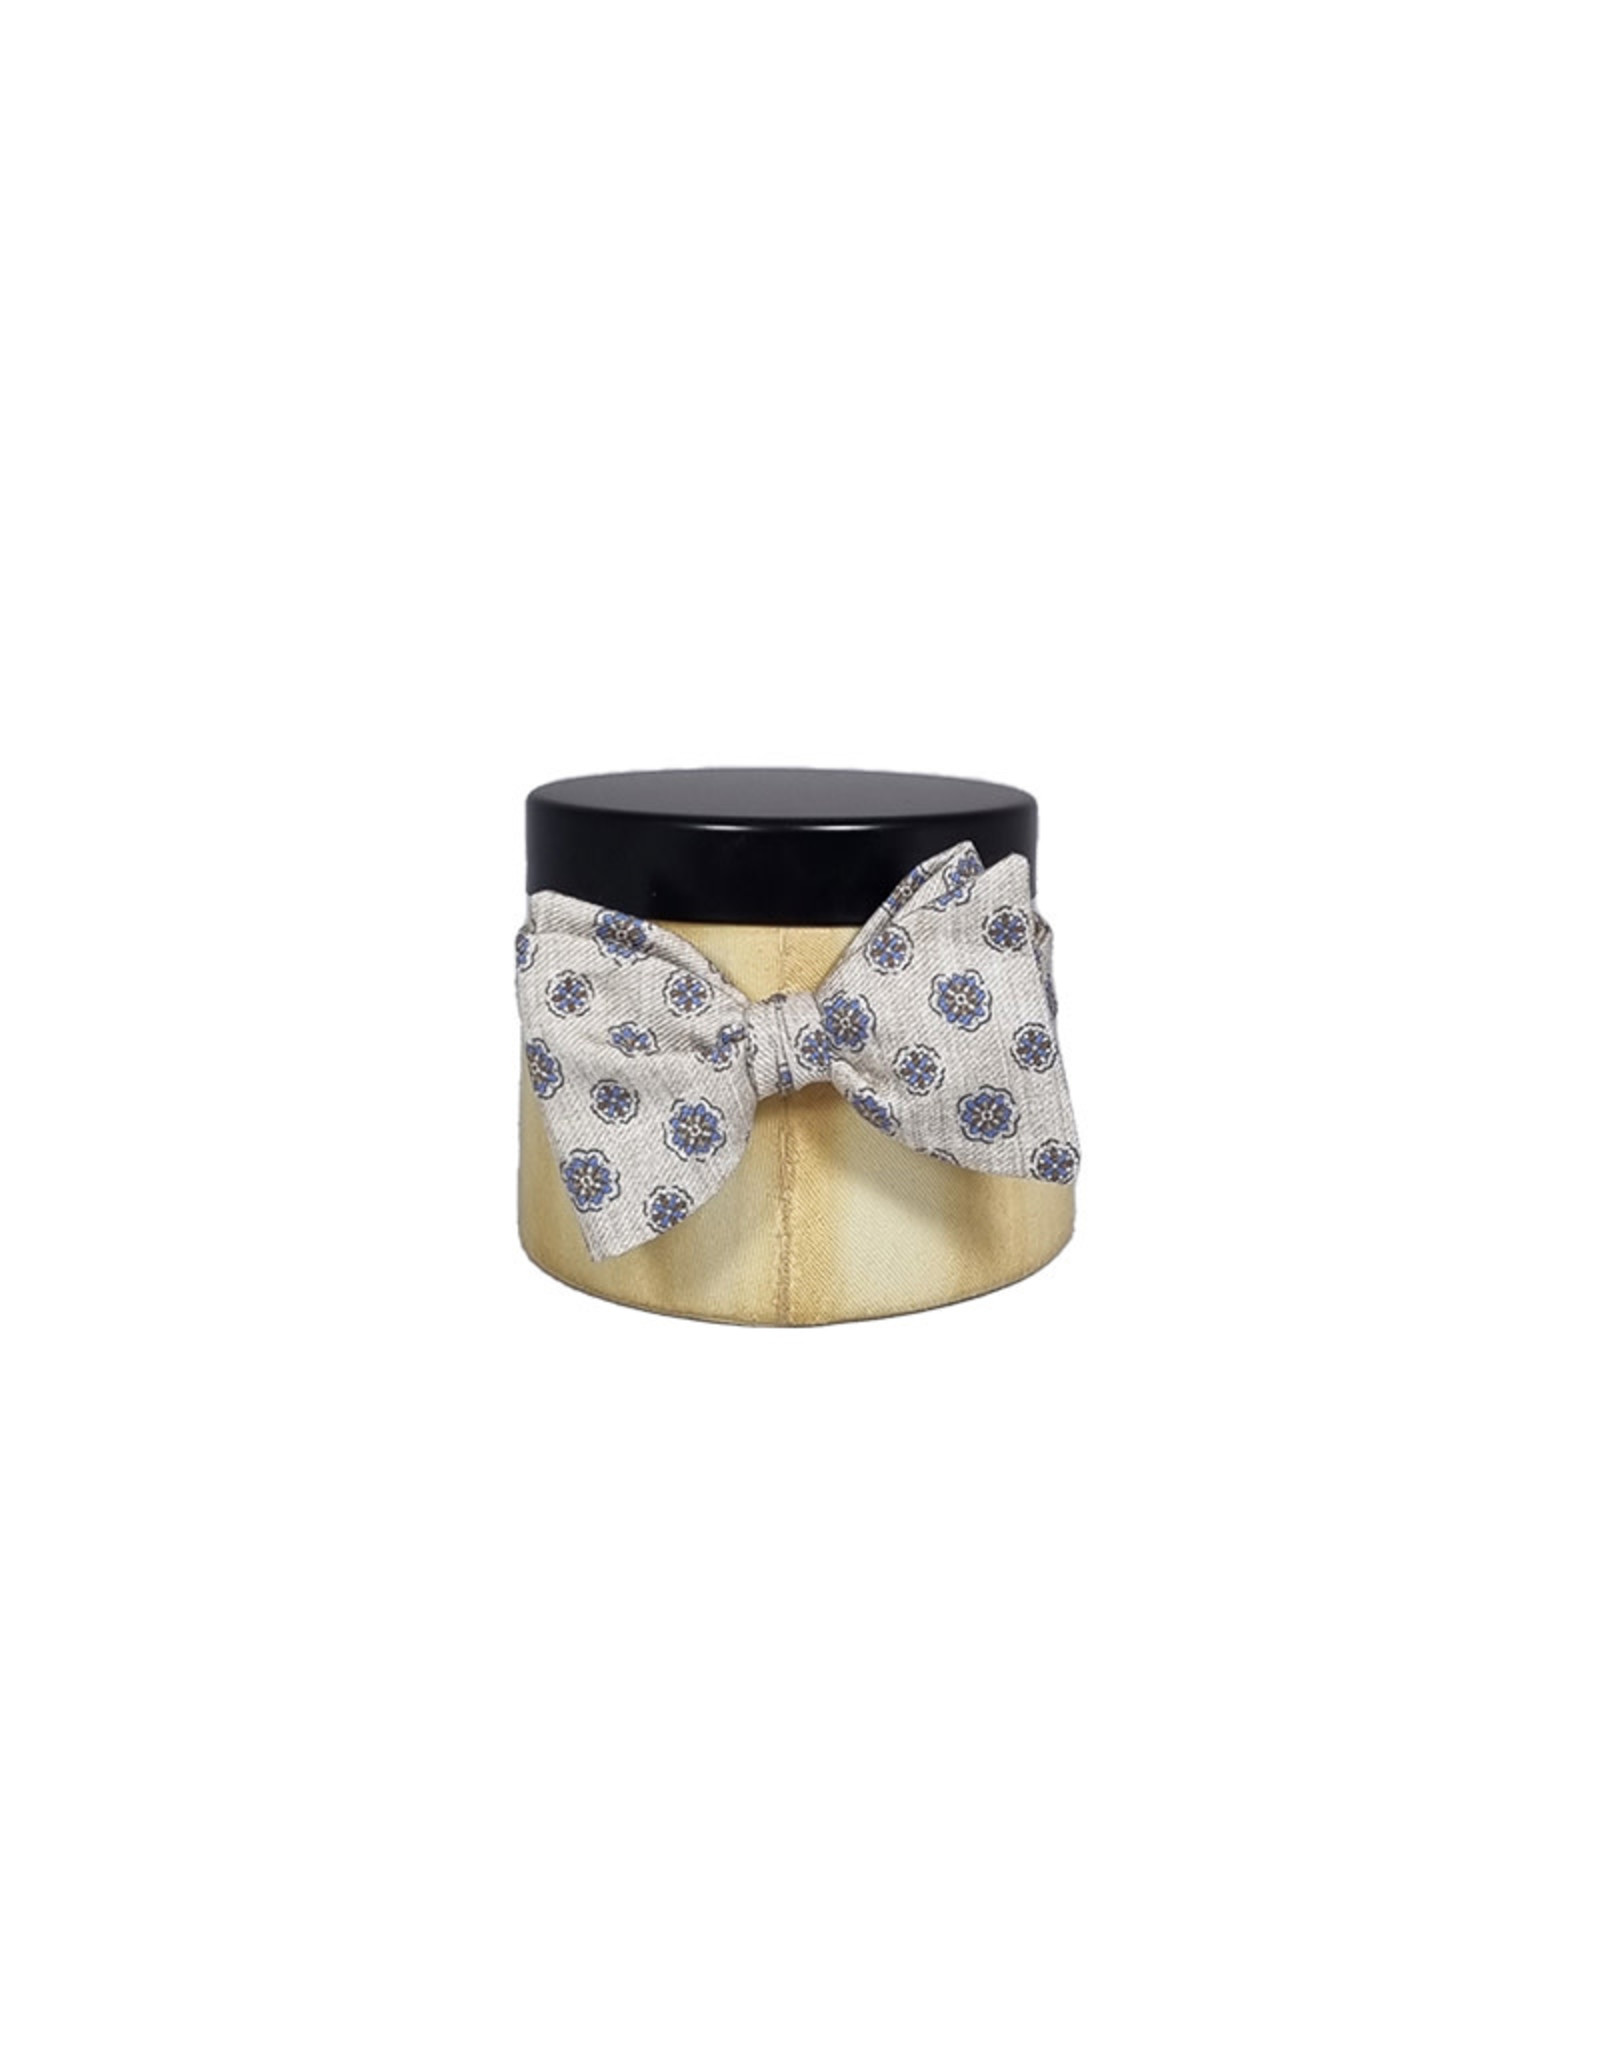 Calabrese Calabrese bow tie medallion beige